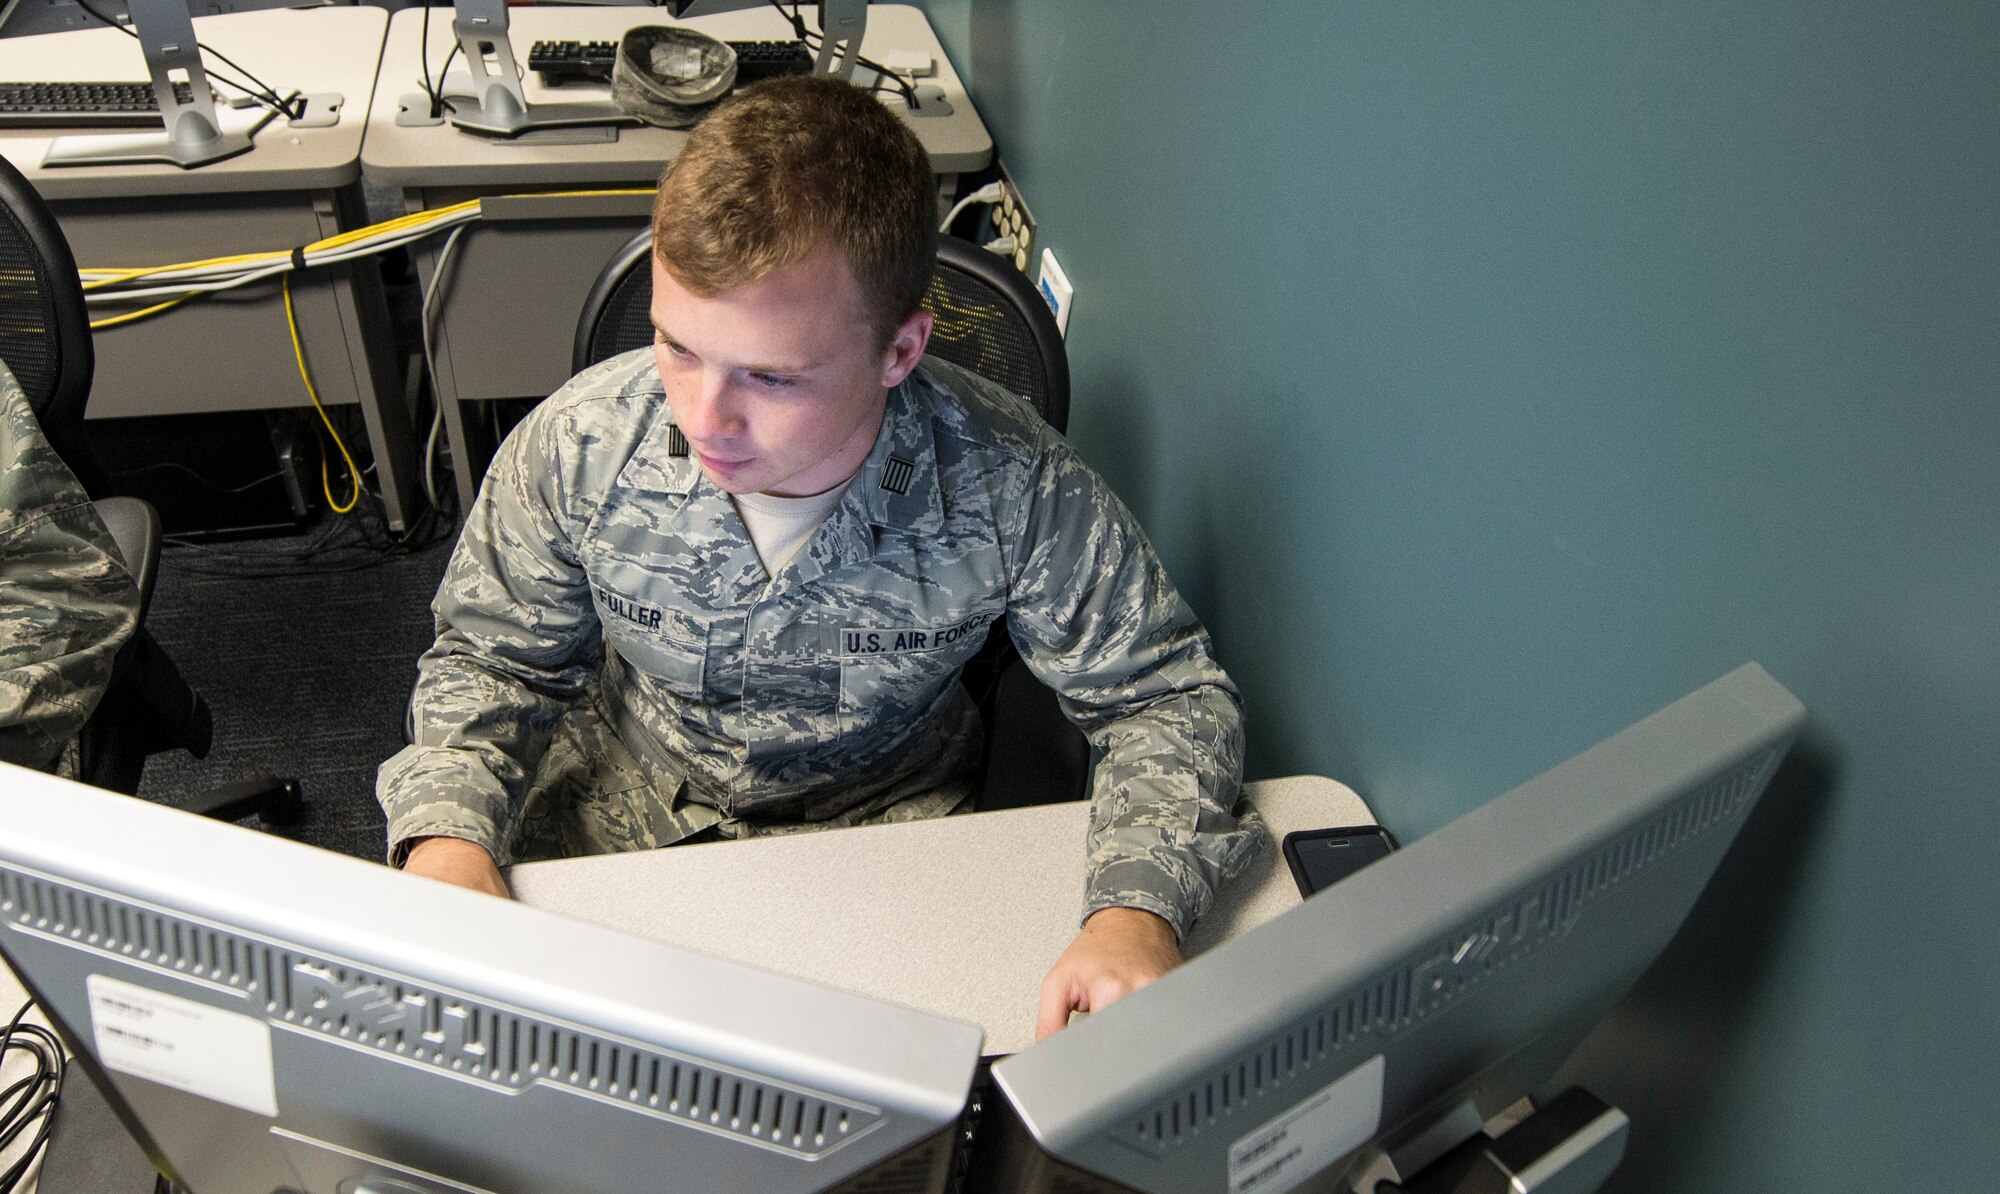 Advanced Cyber Education program cadets at the Air Force Institute of Technology race against two other teams to build a minicomputer network while maintaining their infrastructures, which are purposely vulnerable to attack. The team's progress and new challenges are openly displayed during the two-day competition. (Air Force photo by Wesley Farnsworth)